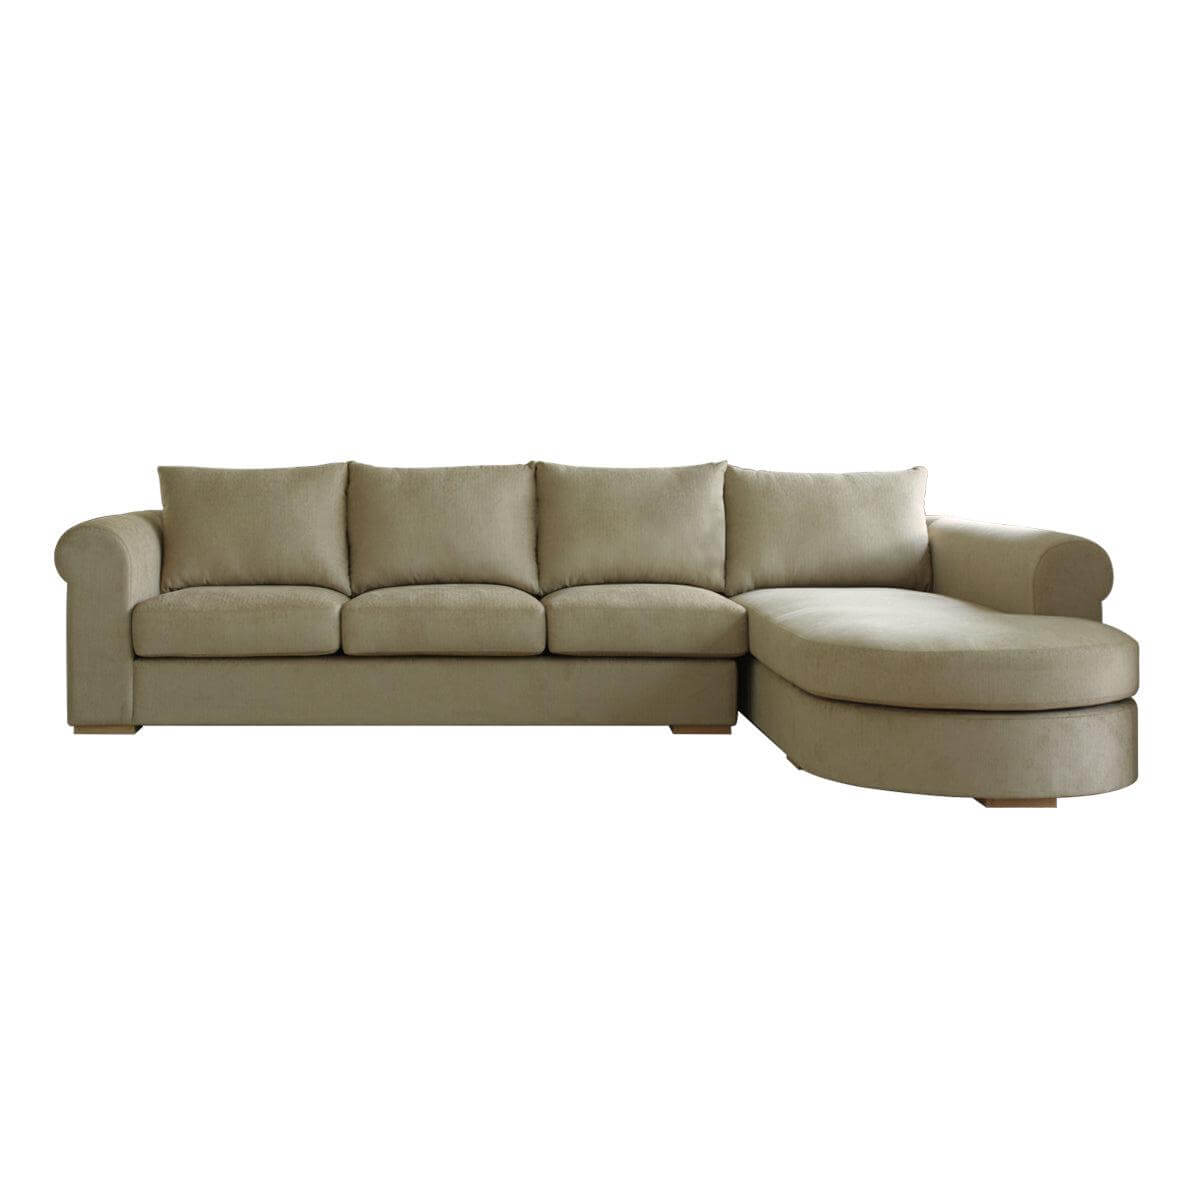 Tuscany L-shape three seat Sofa - classic look paired with modern 